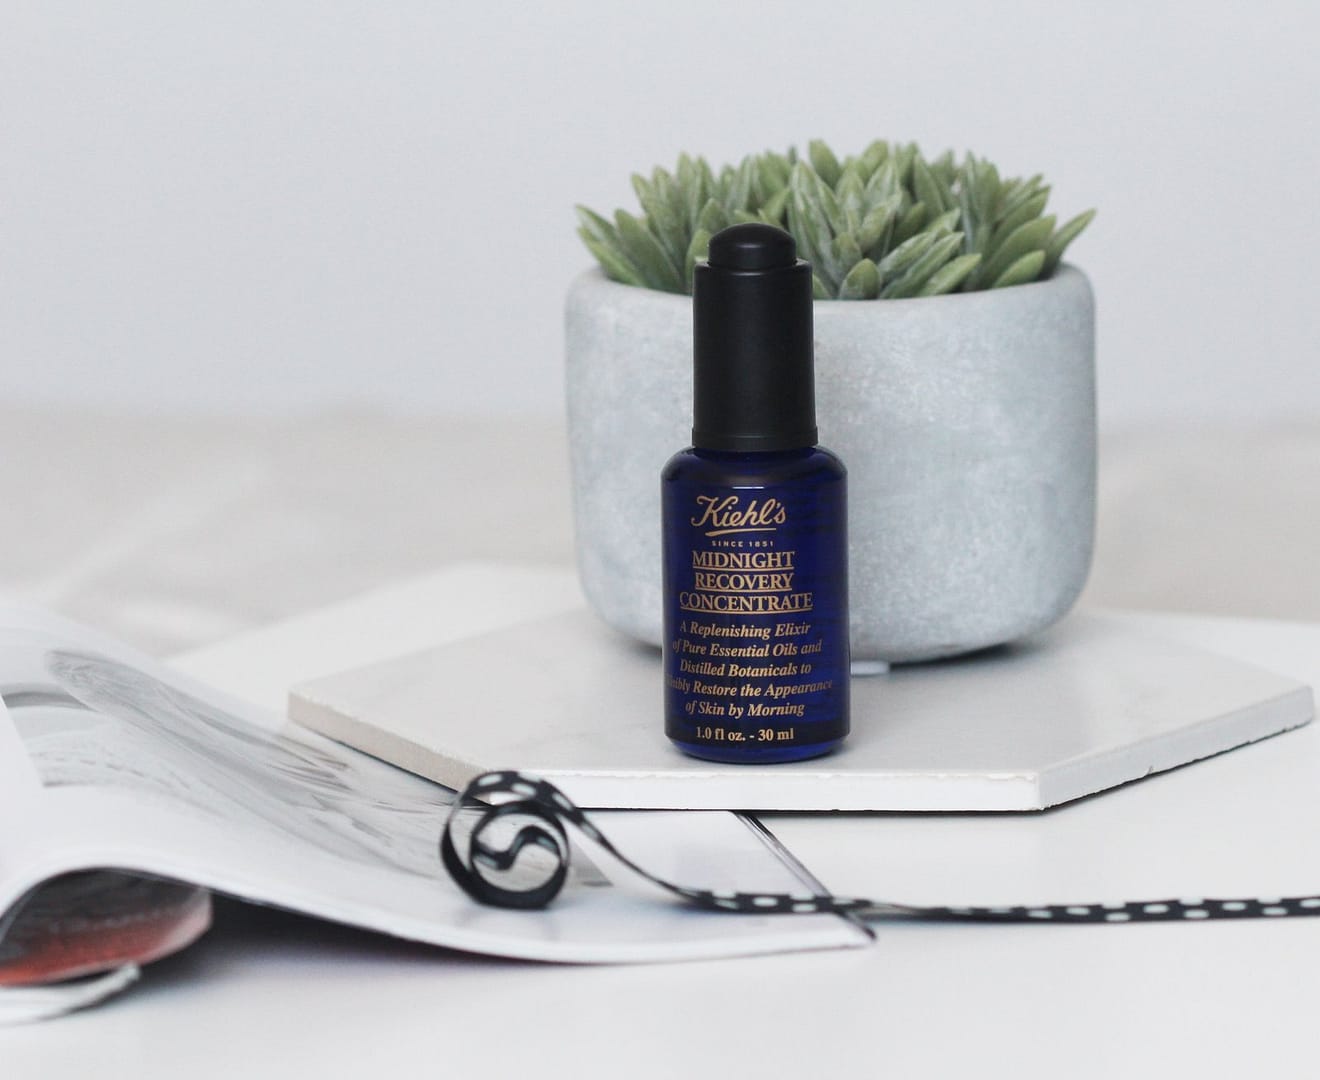 Kiehls Midnight Recovery Concentrate Review